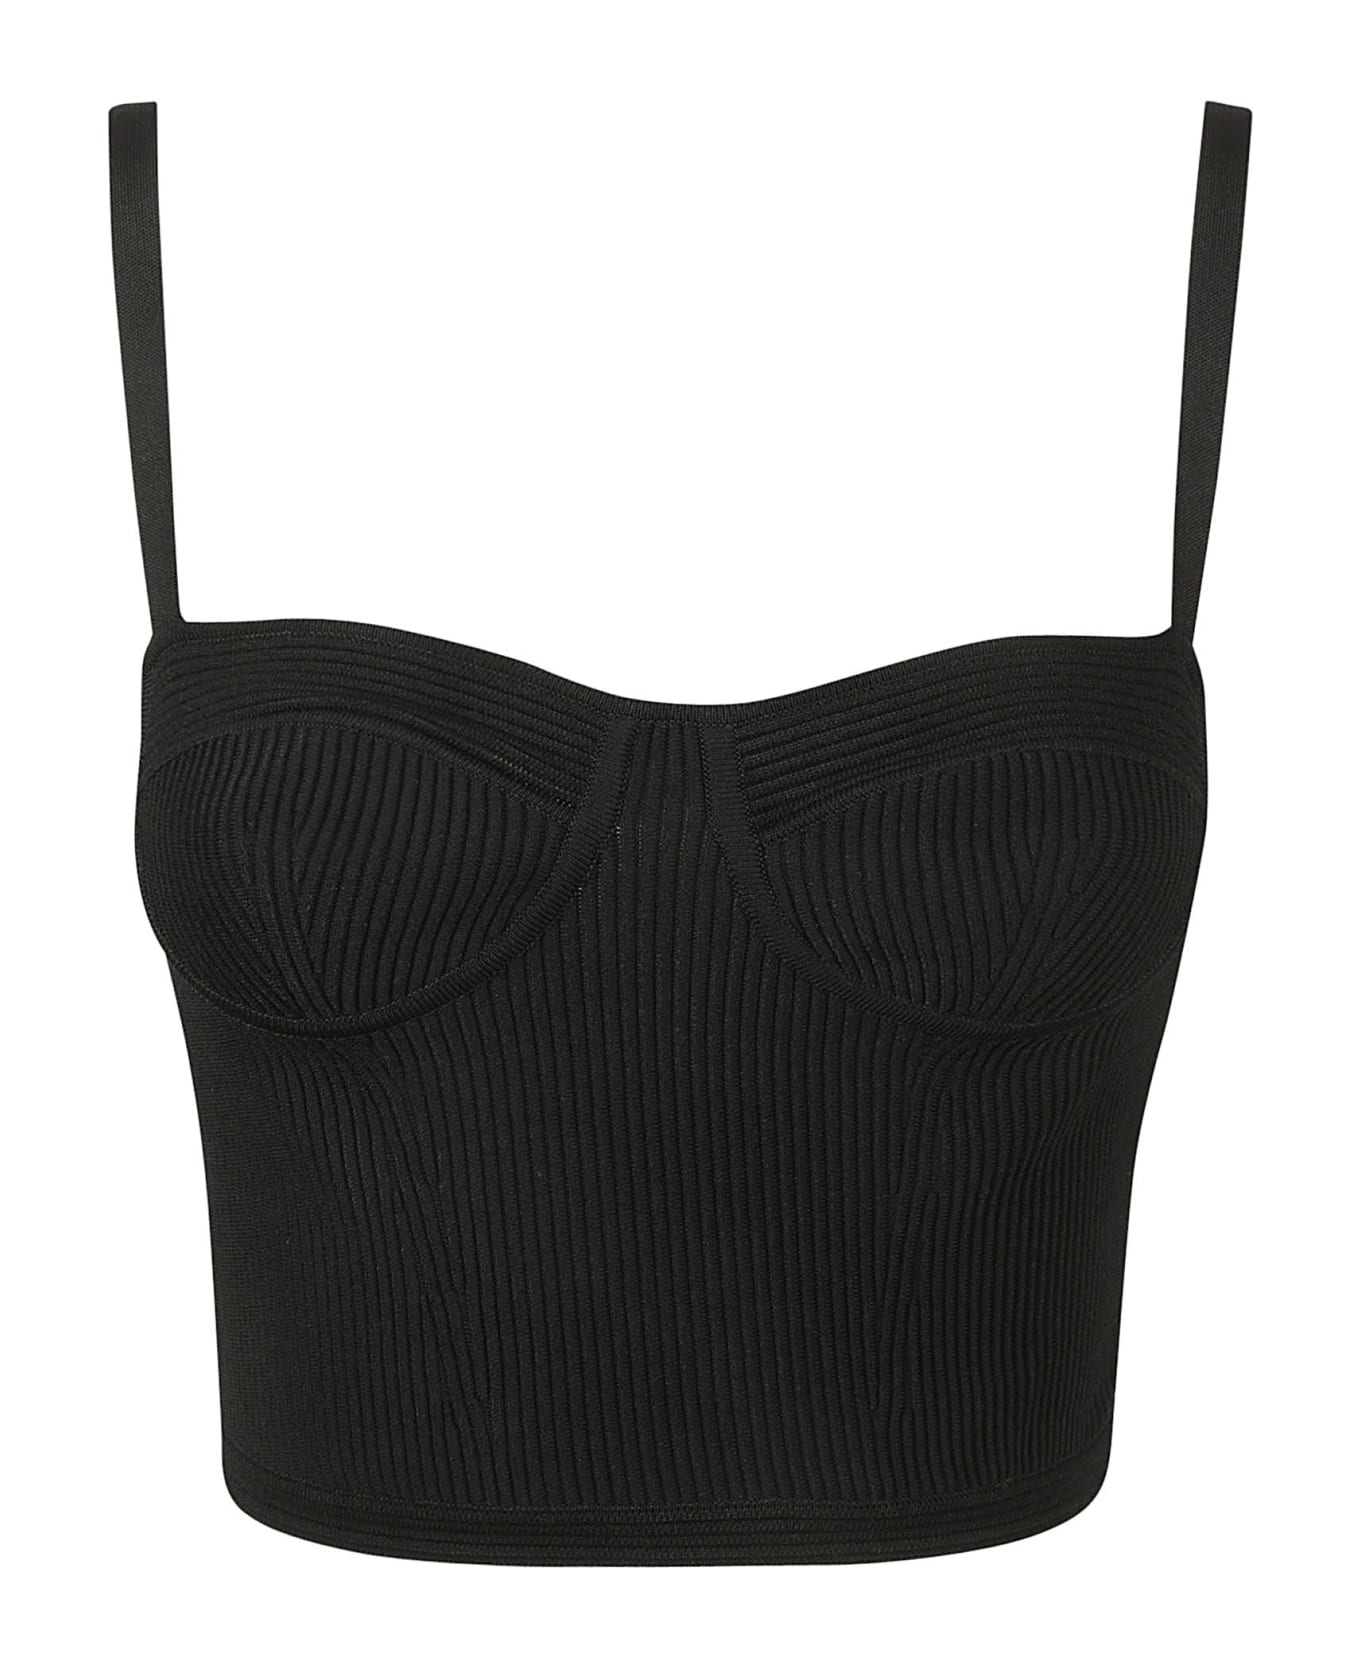 Alexander McQueen Knit Cropped Top - Black トップス